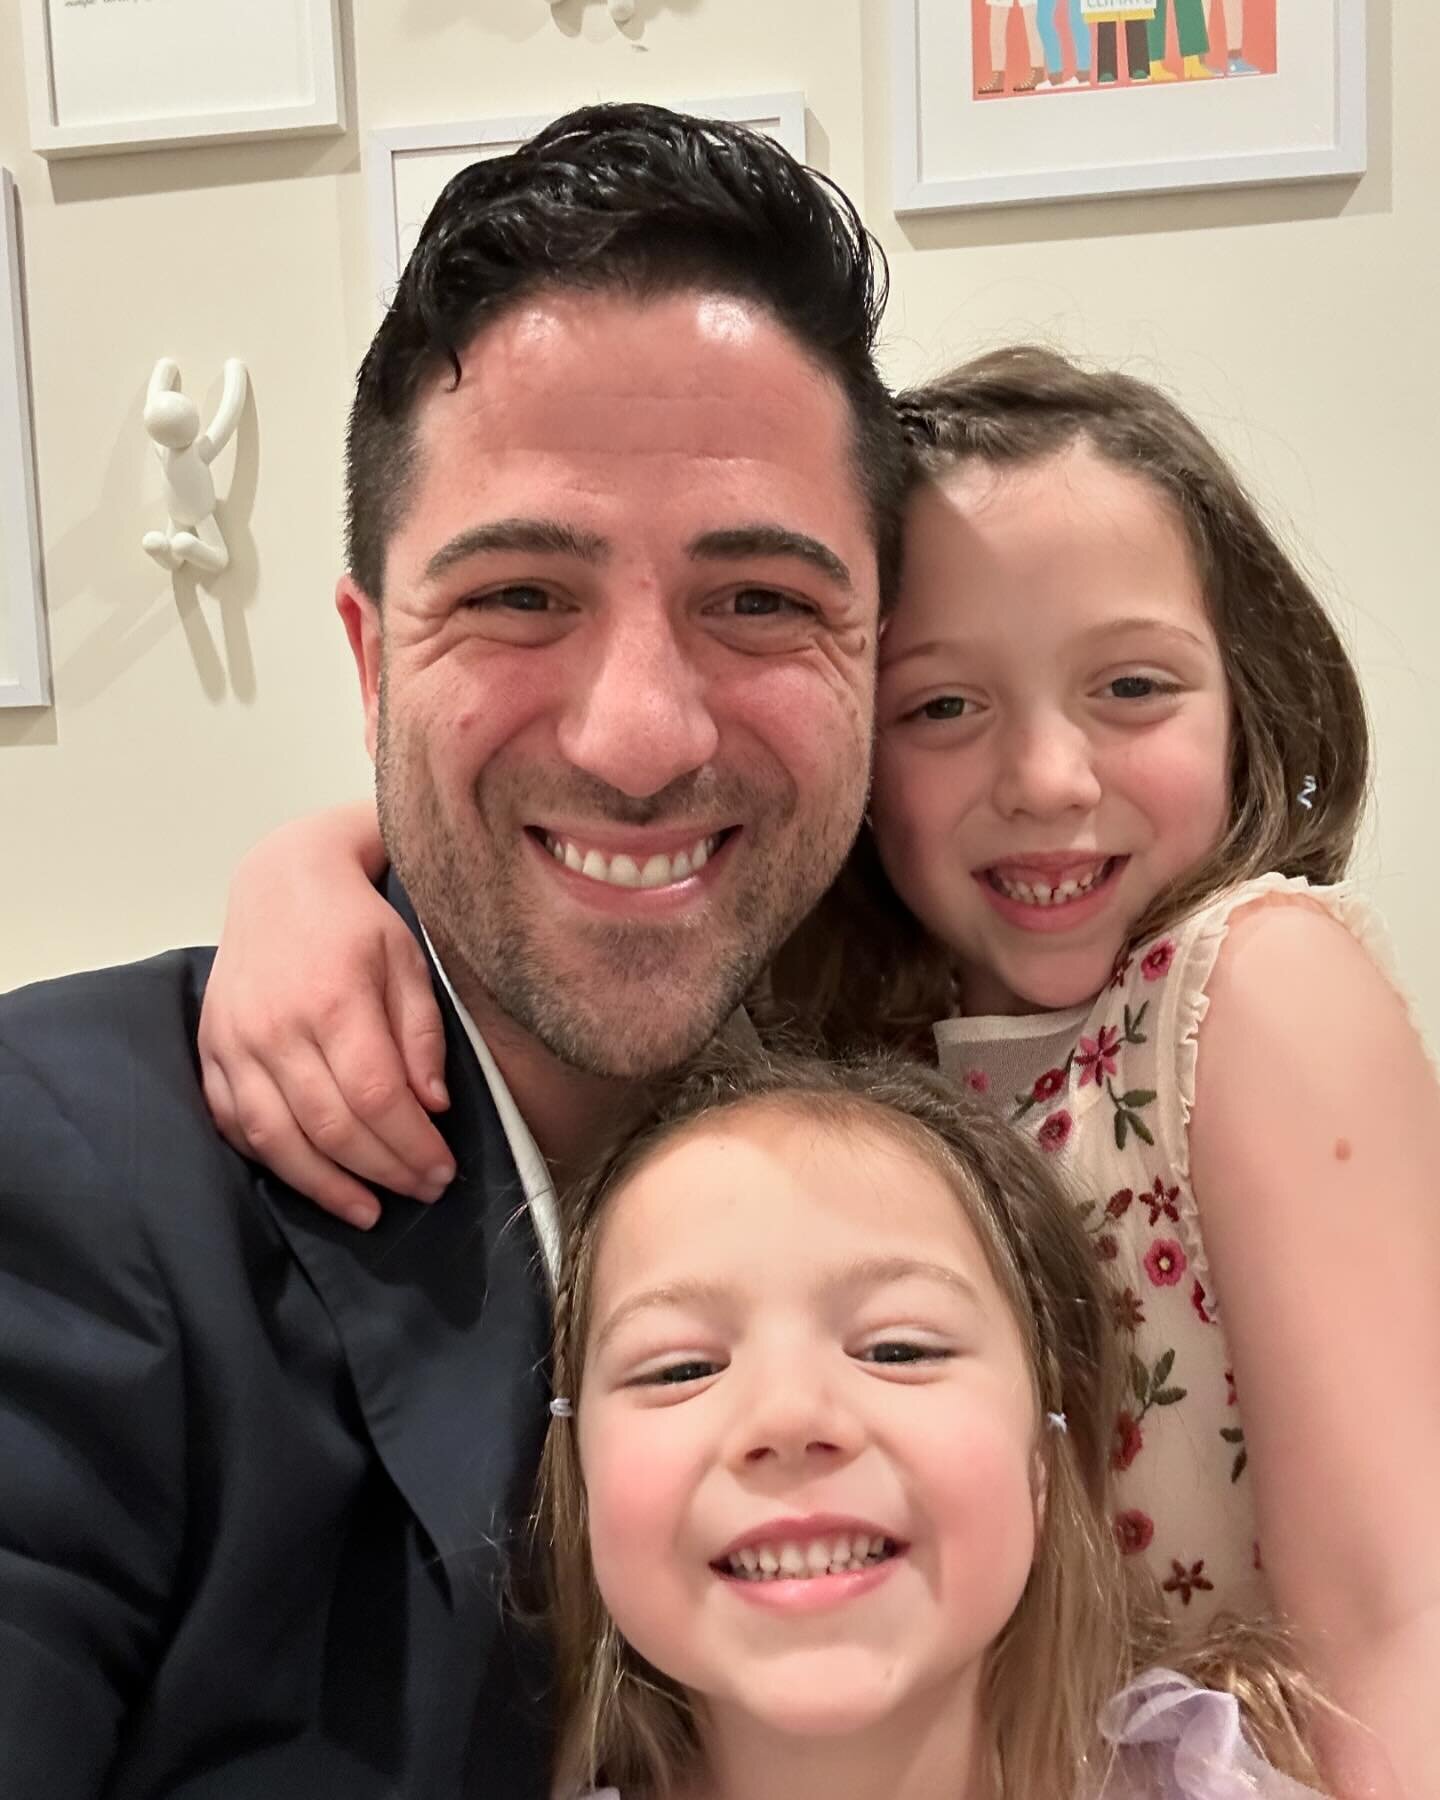 My first Daddy-Daughter Dance with the best dates I could ever dream of 🥹👨&zwj;👧&zwj;👧

Thank you @psychedpmhnp for giving me two little pieces of you to love forever. Thank you for volunteering and being part of this special beautiful night with